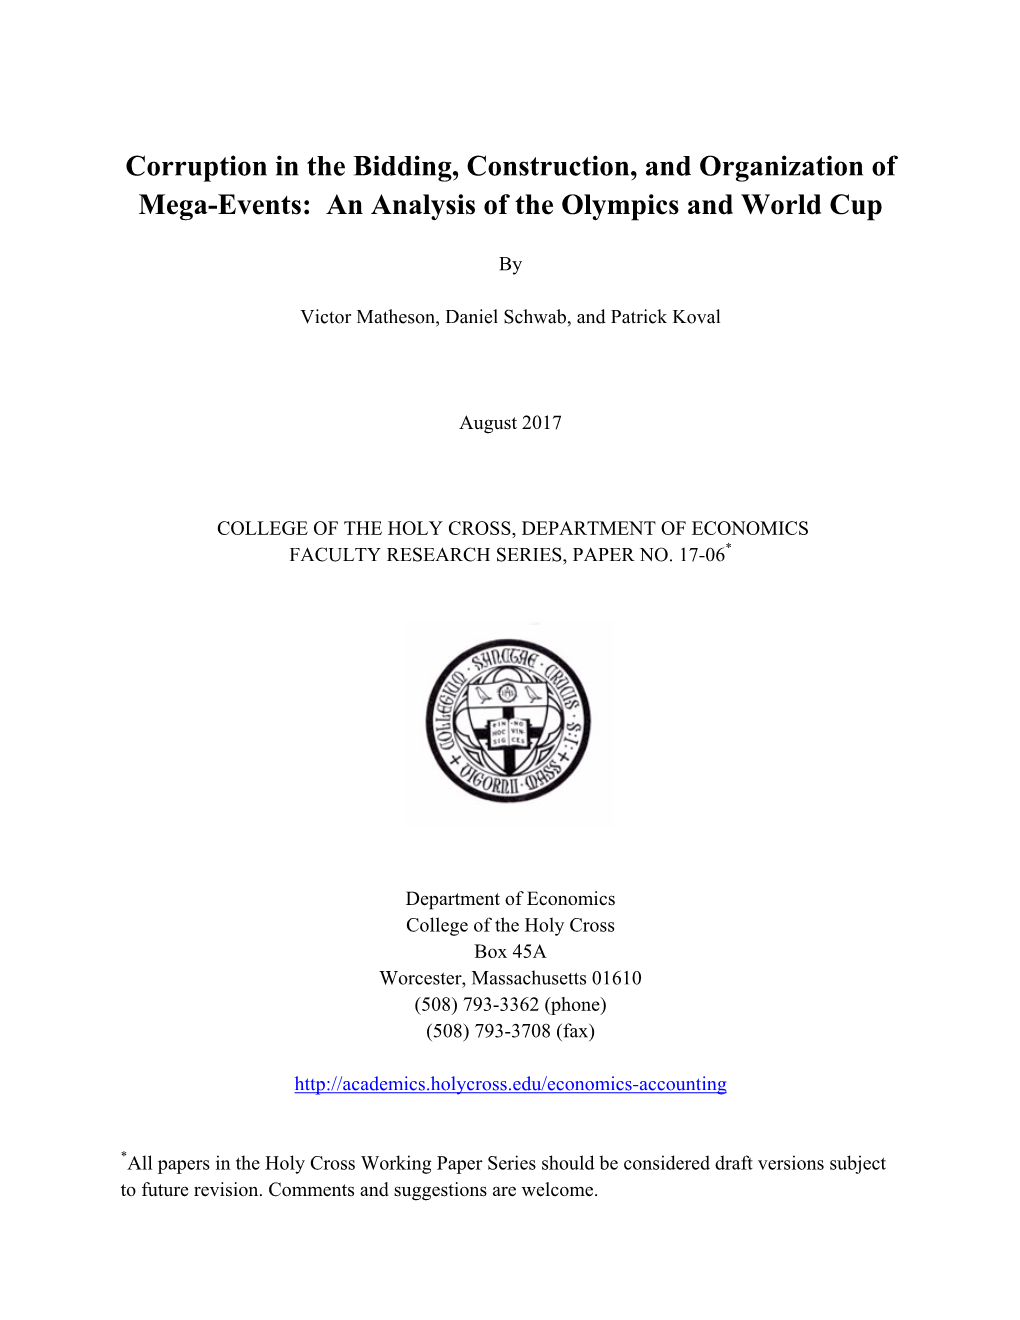 Corruption in the Bidding, Construction, and Organization of Mega-Events: an Analysis of the Olympics and World Cup